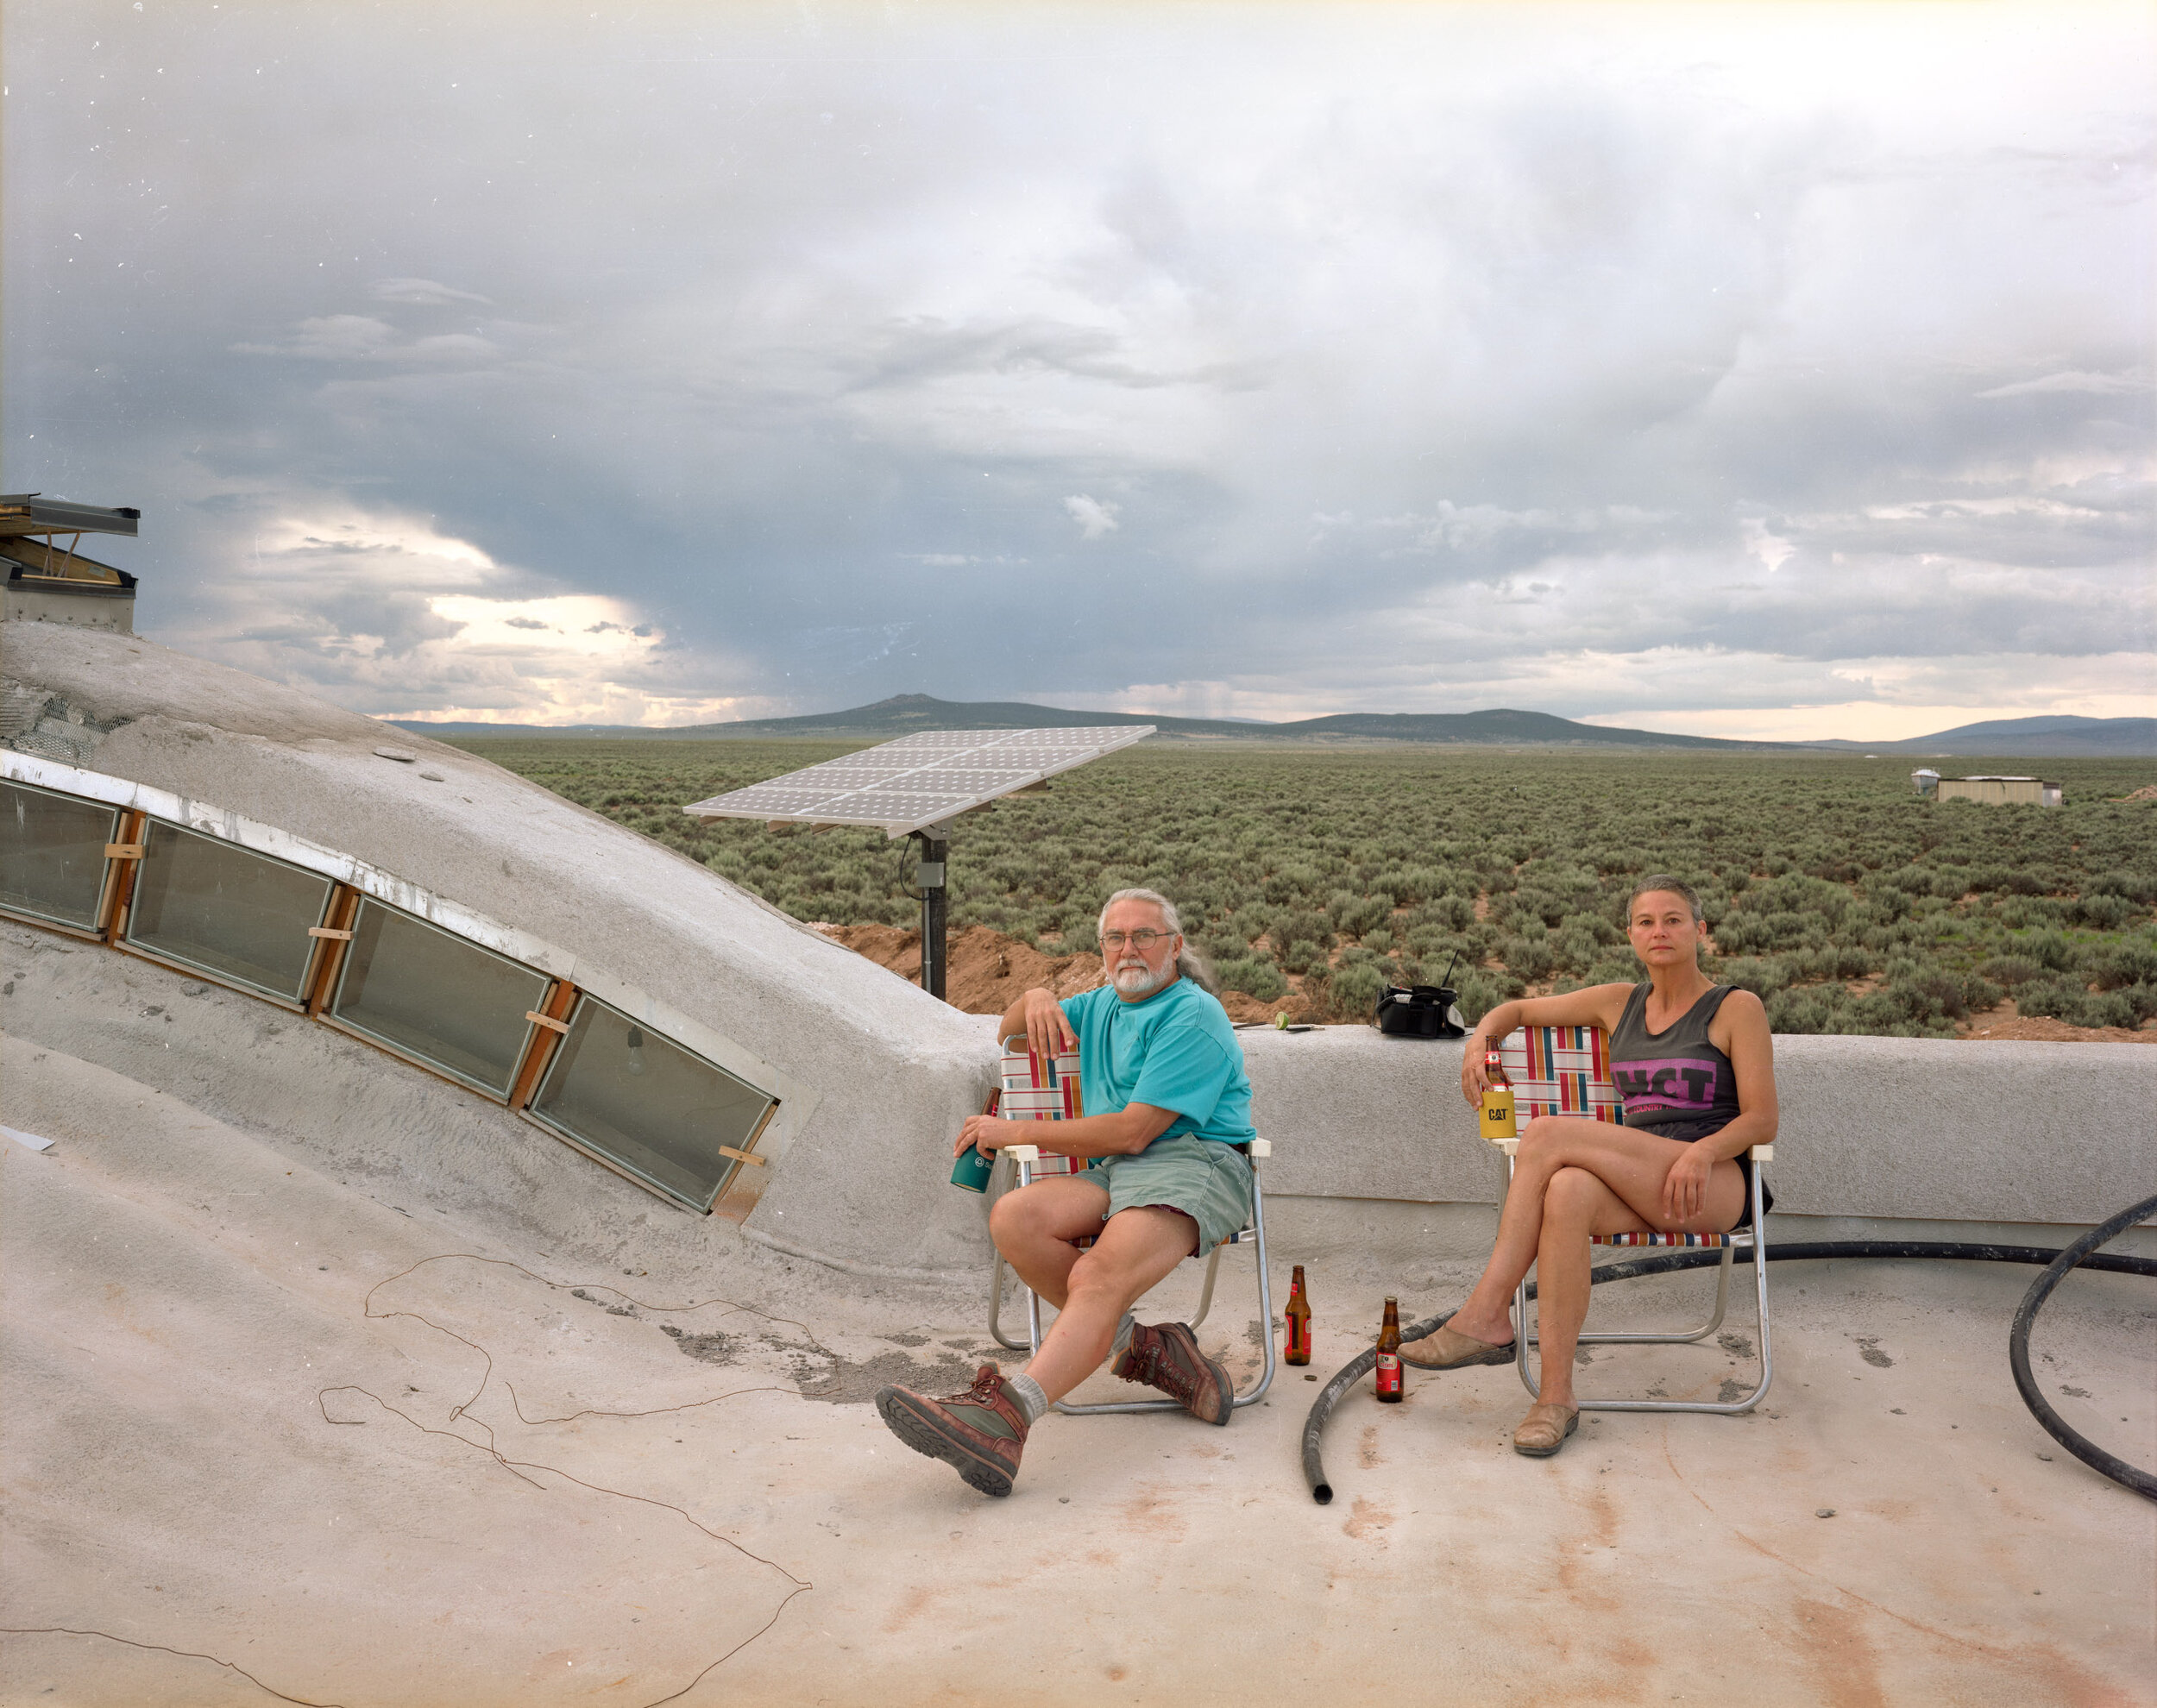 A Couple on the Roof of Their Home under Construction, Tres Orejas, New Mexico, July 1999